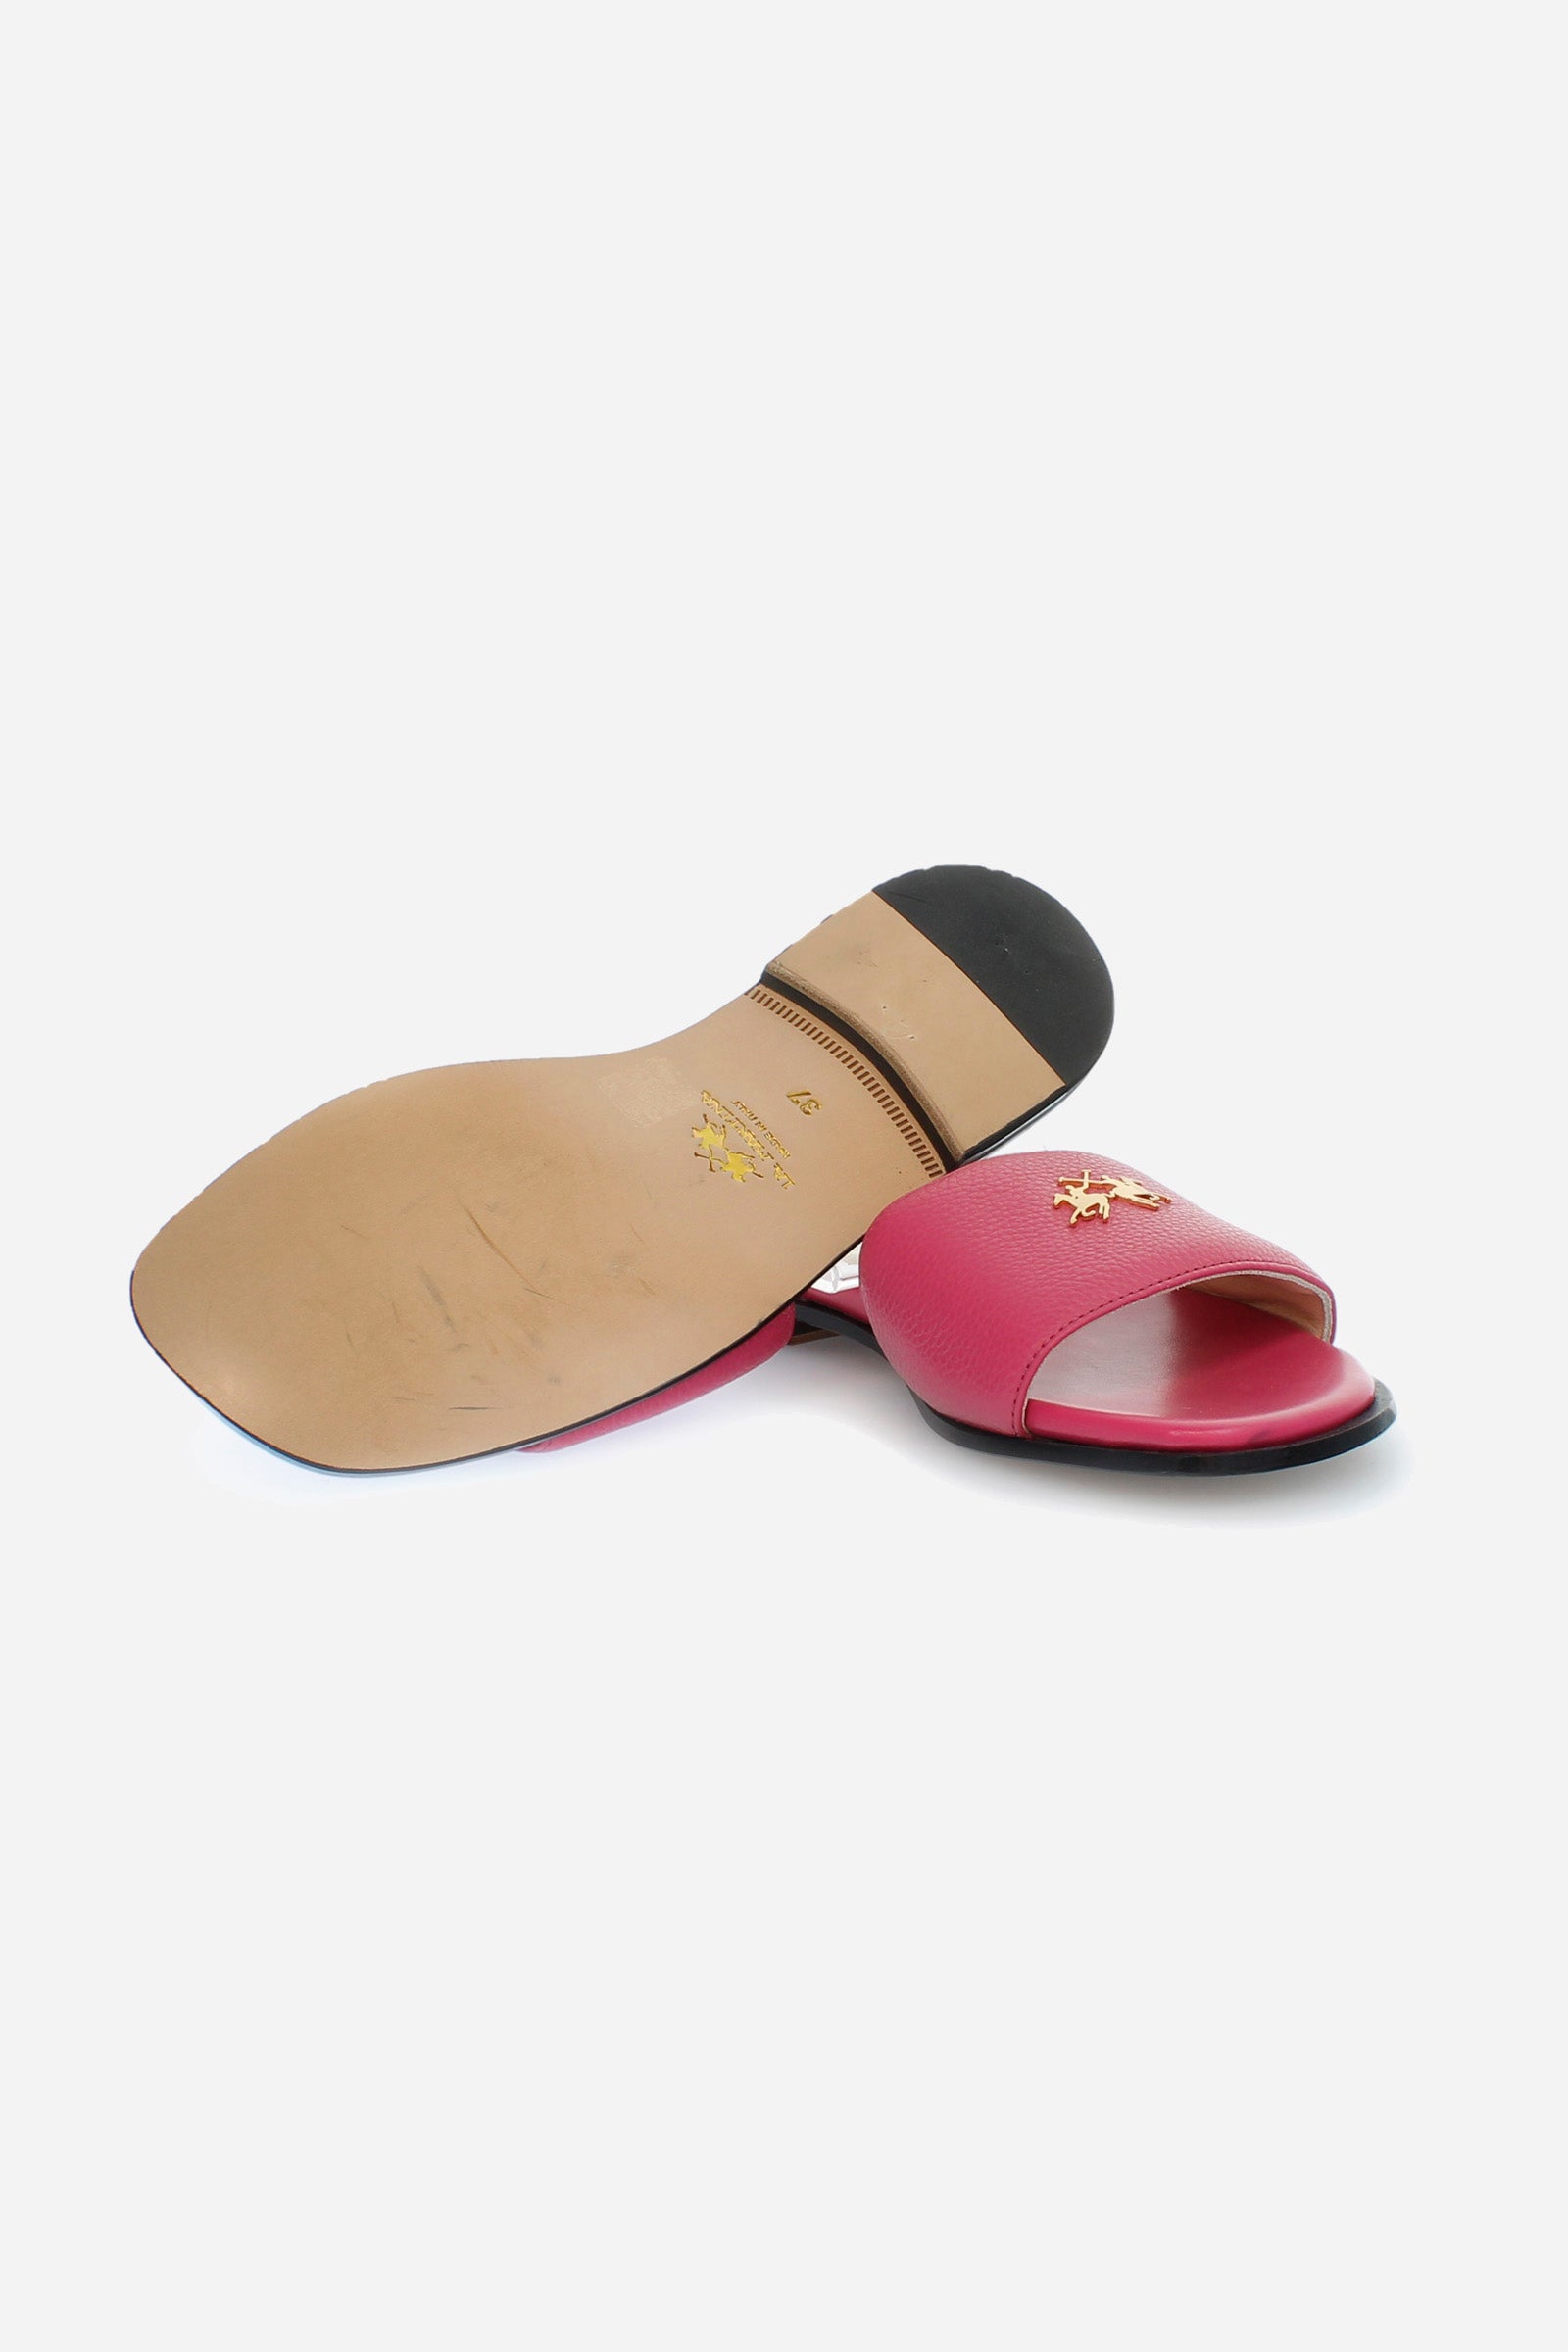 Women's sandals in leather